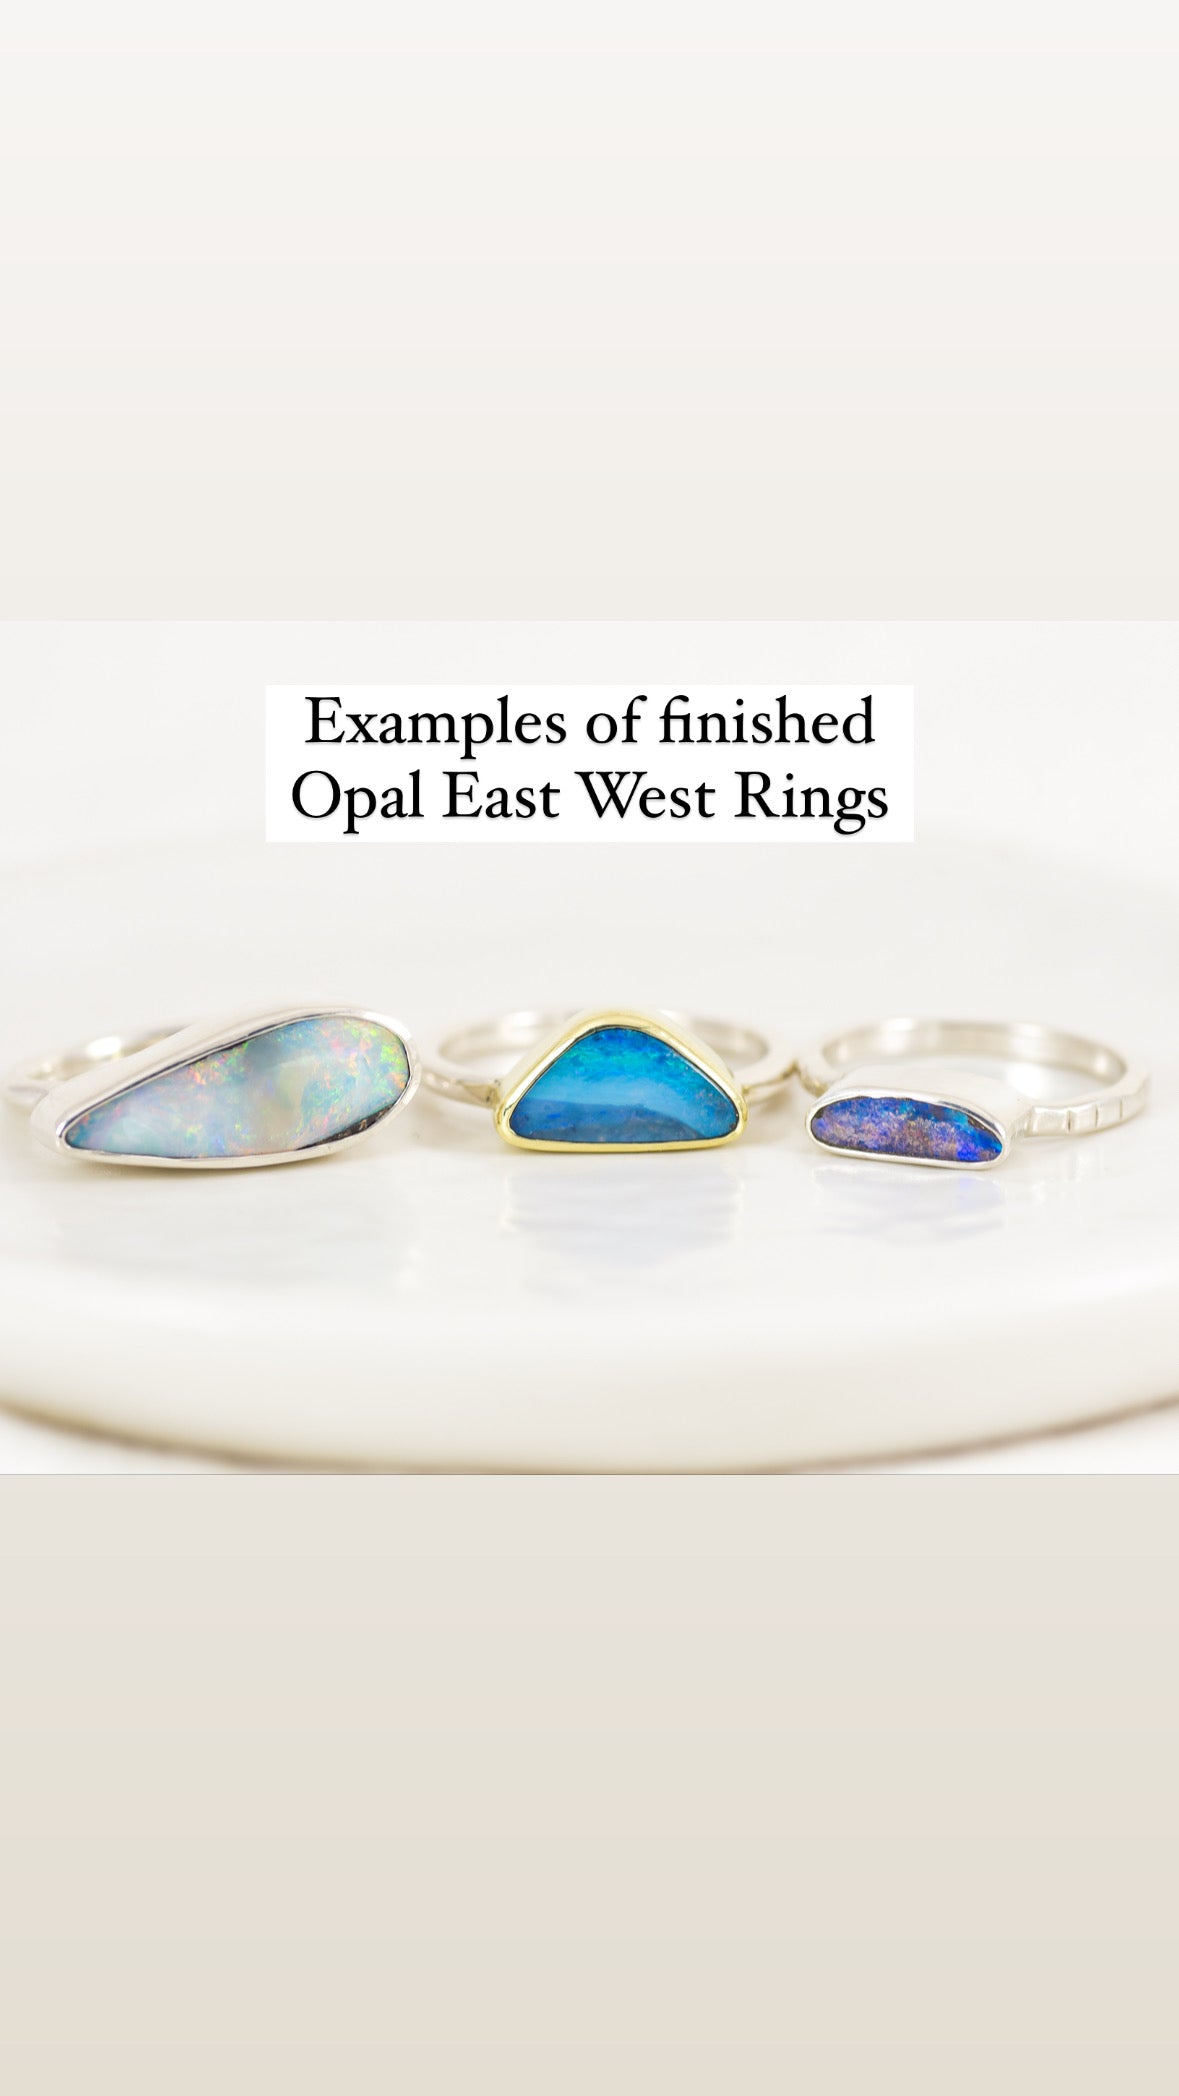 Opal East West Ring #10 (Pre-Order) ◇ Australian Opal ◇ Made in your size